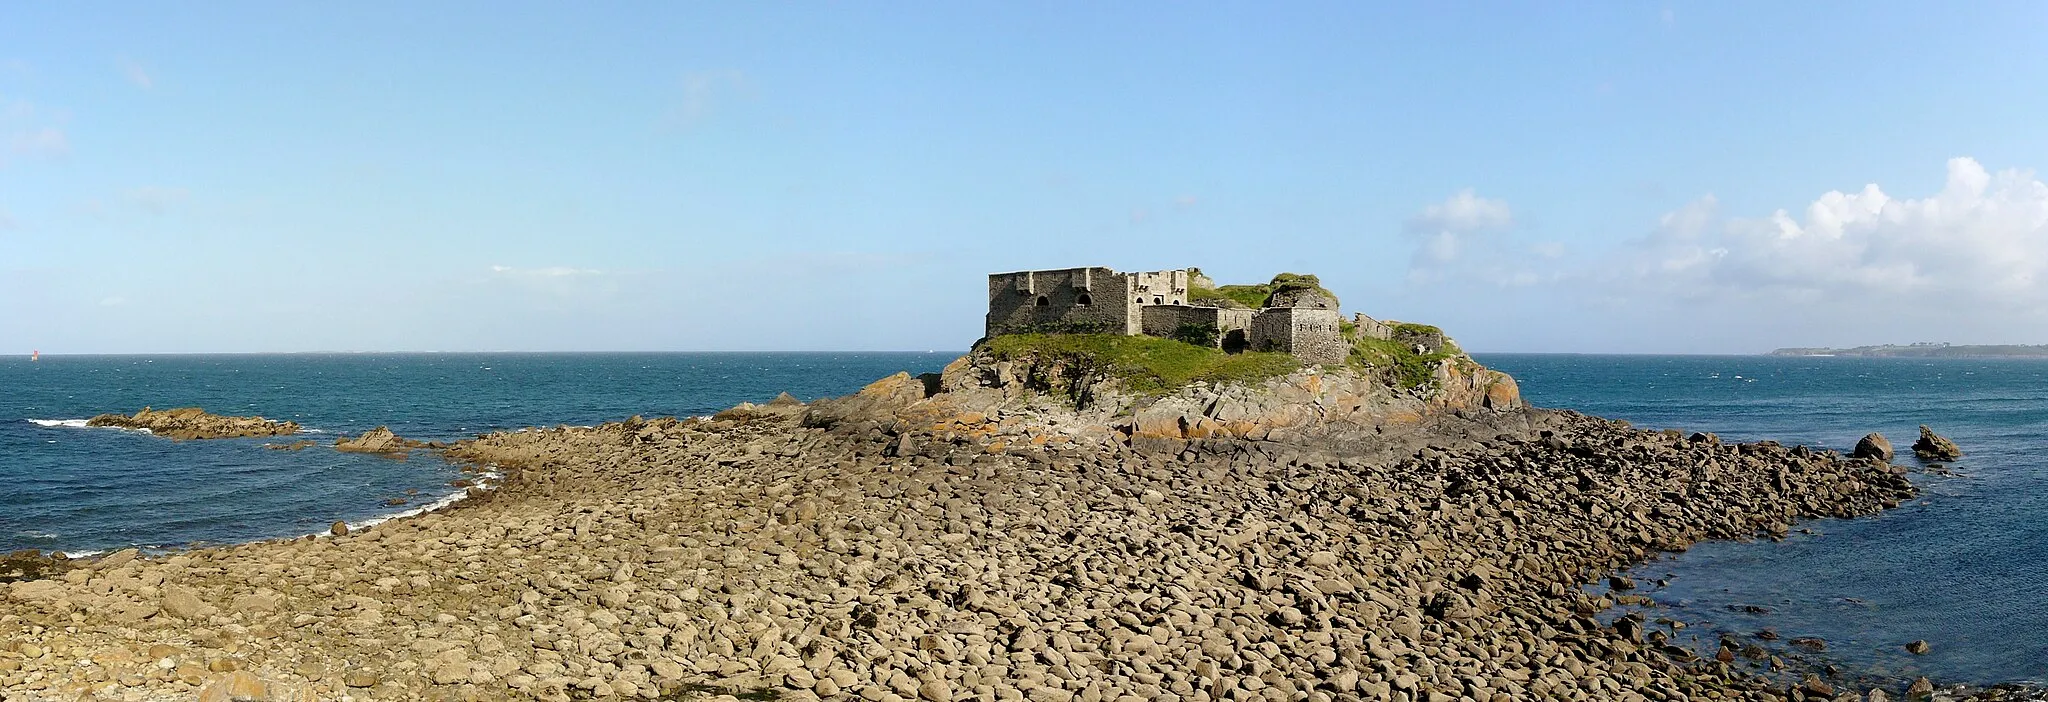 Photo showing: Fortress of the Îlette of Kermovan, in municiplaity of Le Conquet (Finistère, Britanny, west of France).